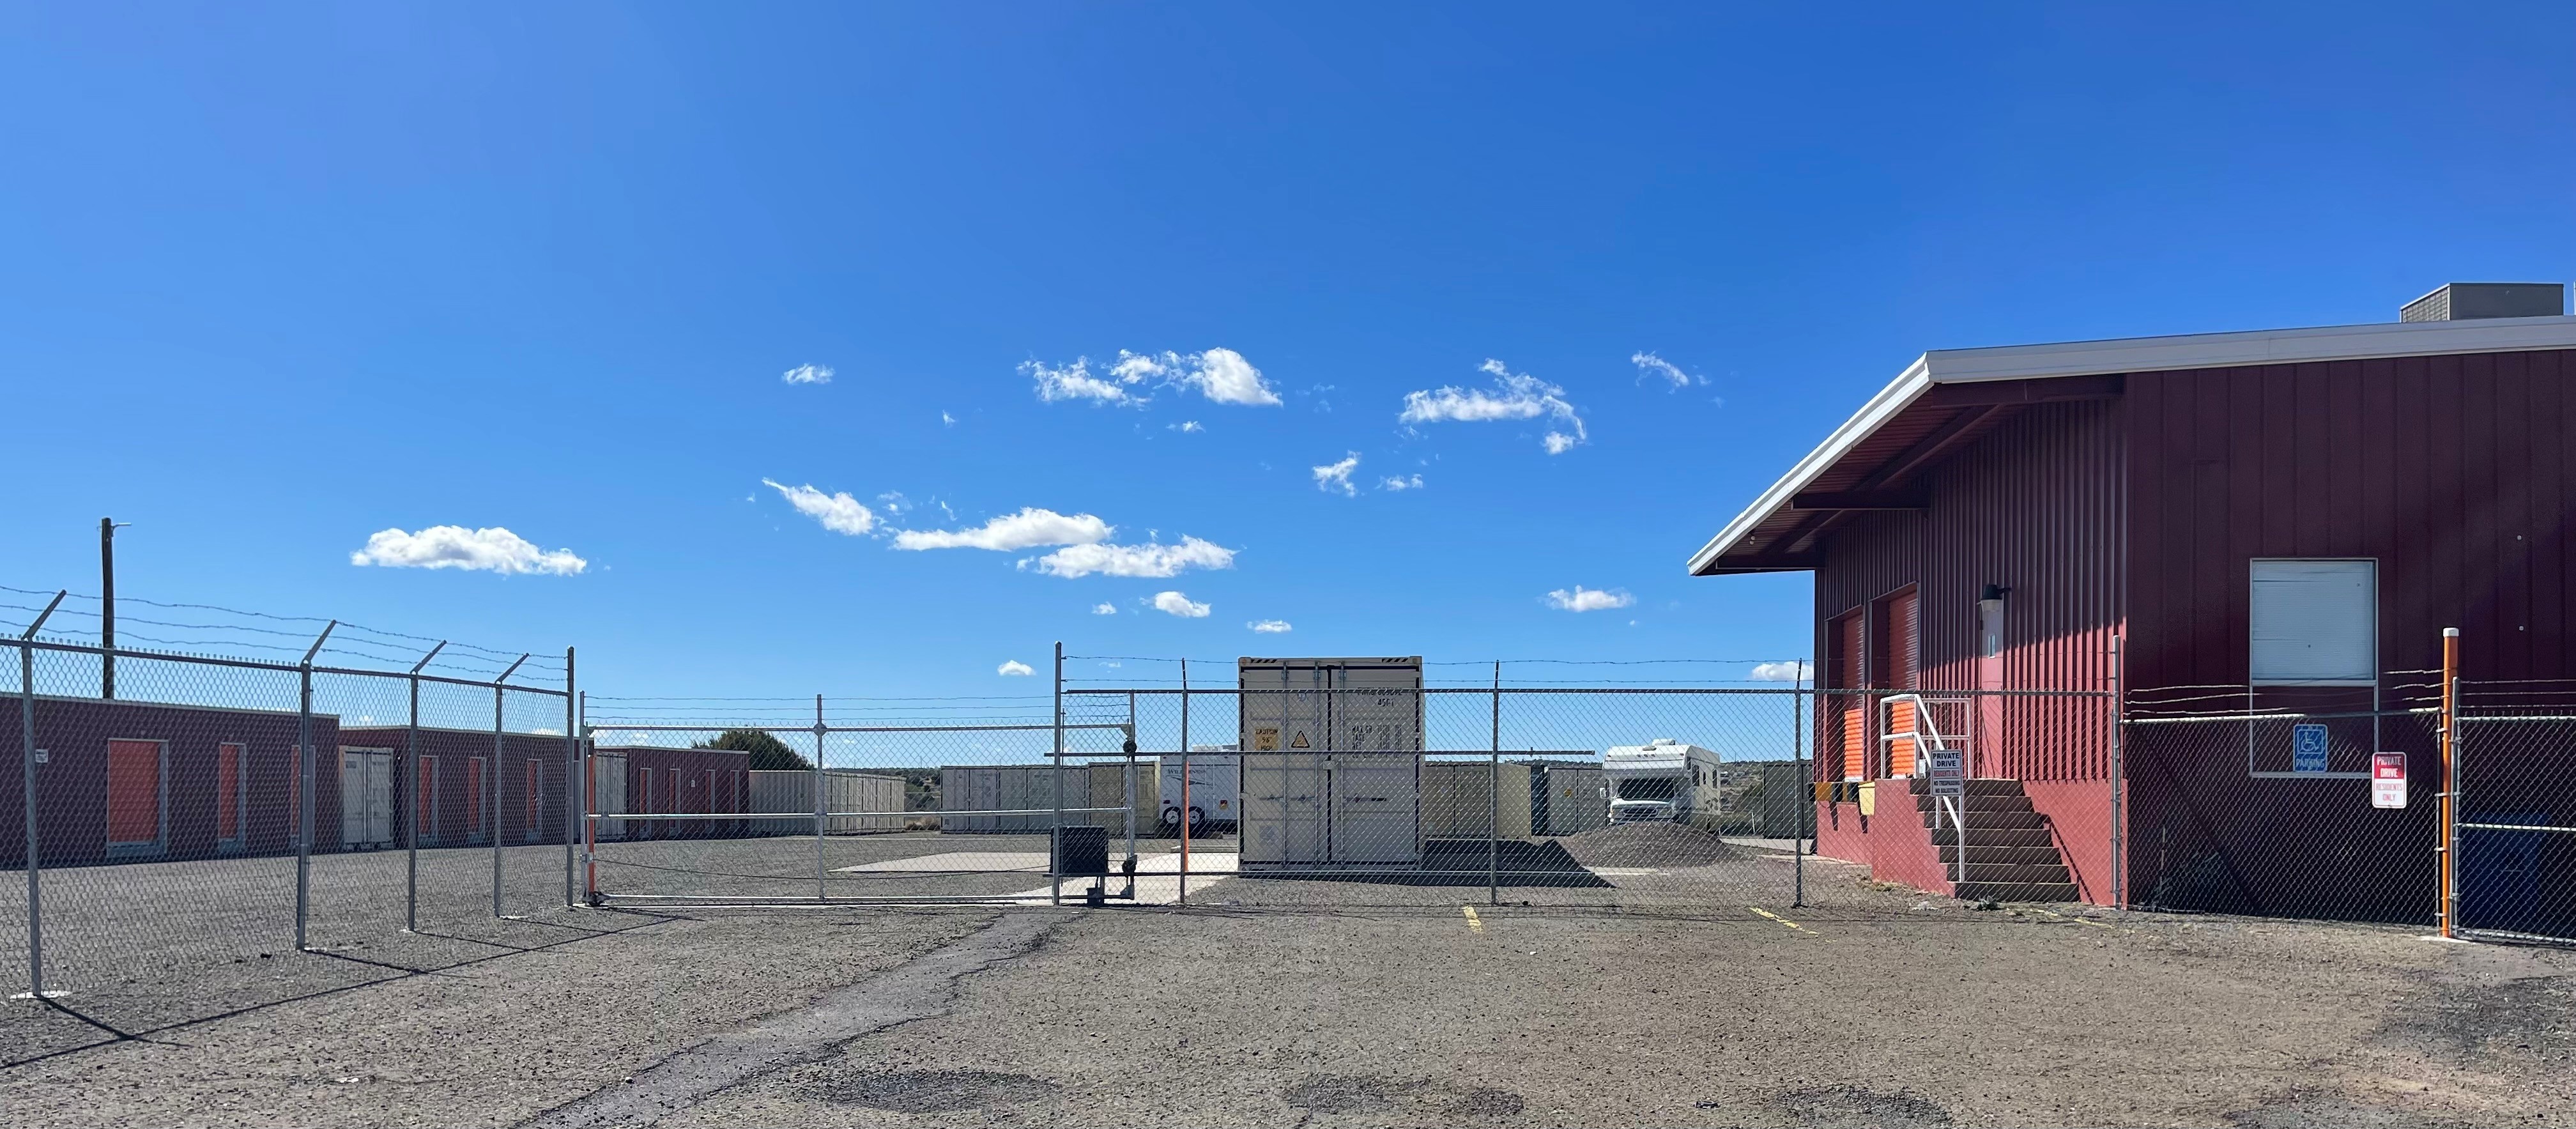 Lock Wise Self Storage - Ridge Road - Secure Storage Units & Outdoor RV/Boat/Vehicle Parking in Silver City, NM